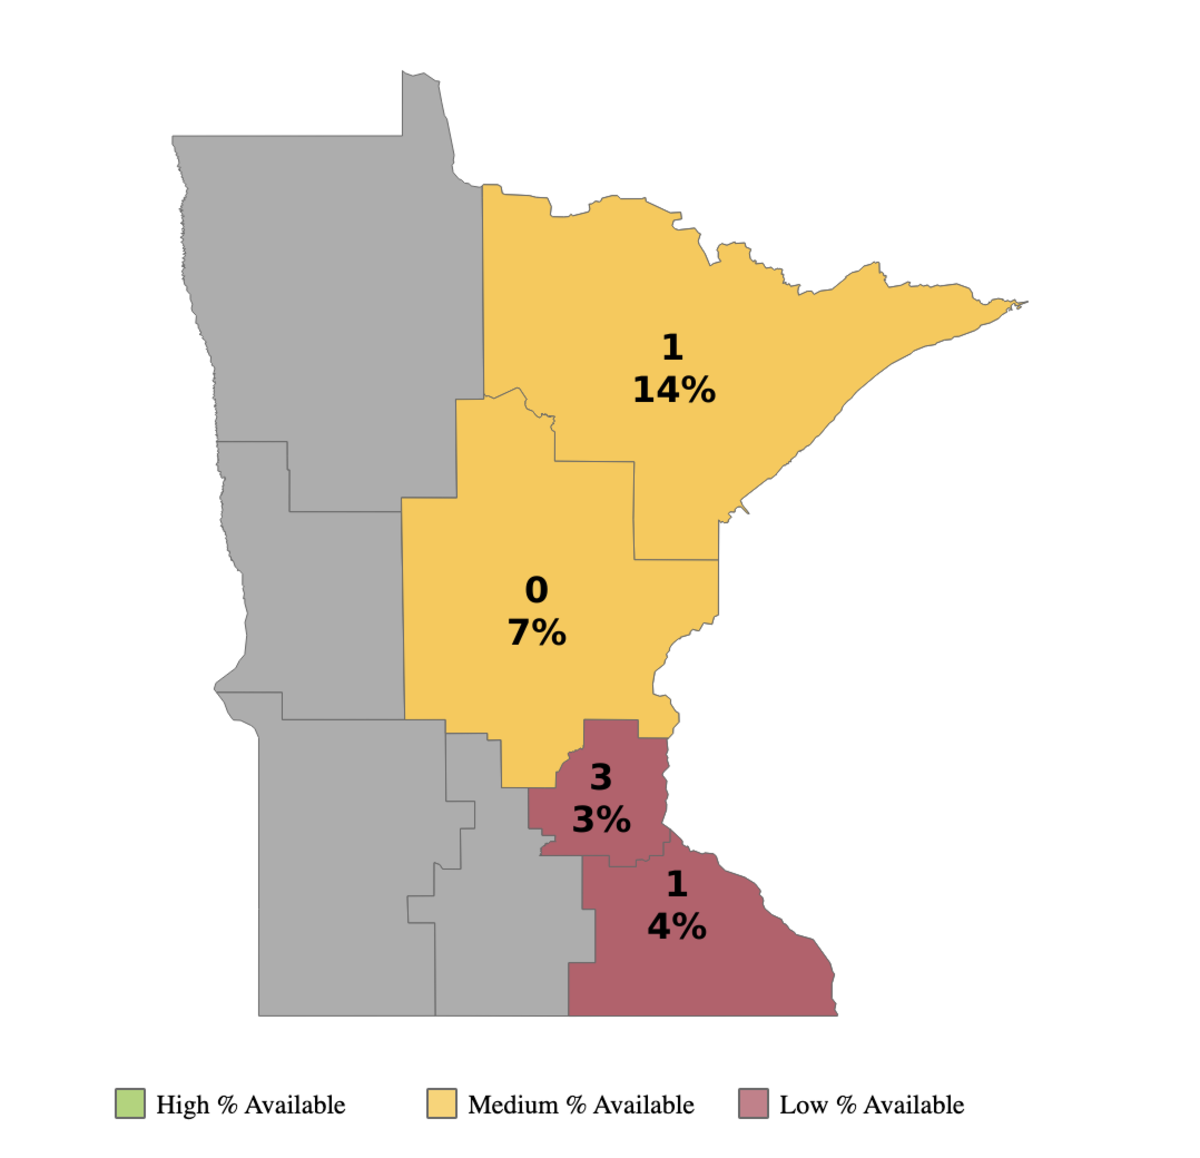 Pediatric Intensive Care Unit bed availability, 7-day average. Minnesota Department of Health. 